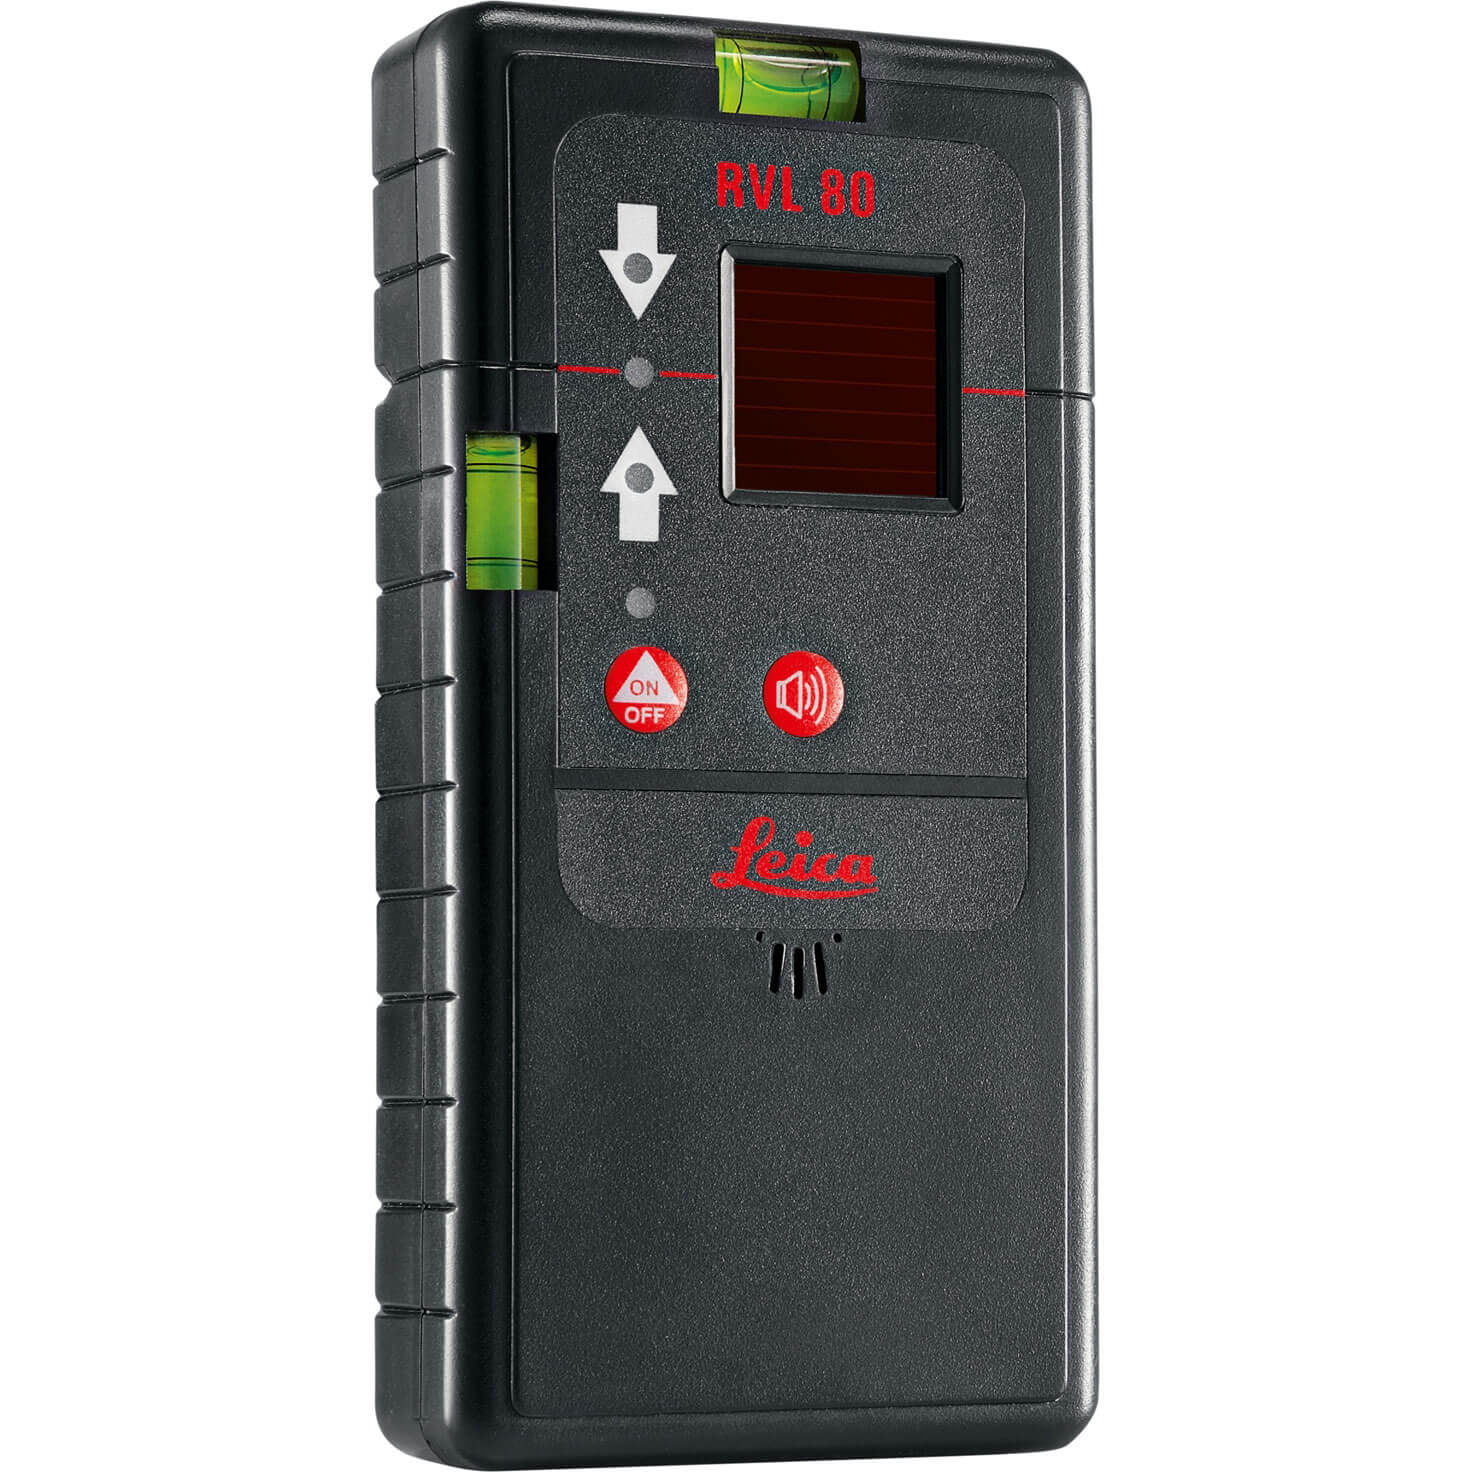 Photo of Leica Geosystems Rvl 80 Line Receiver For Lino Laser Level